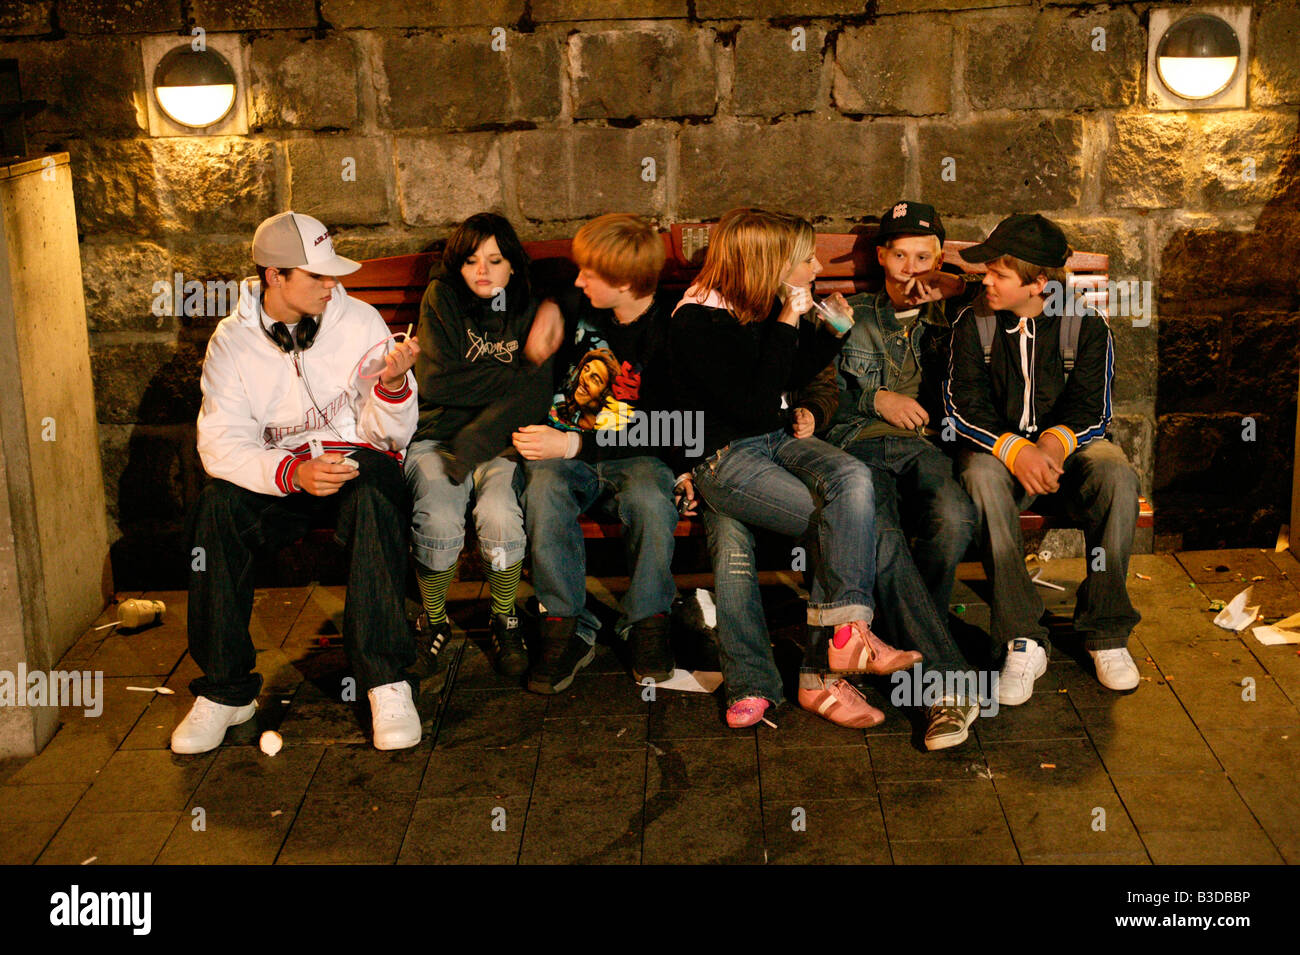 Teenagers sitting on a bench at night, Reykjavik, Iceland Stock Photo